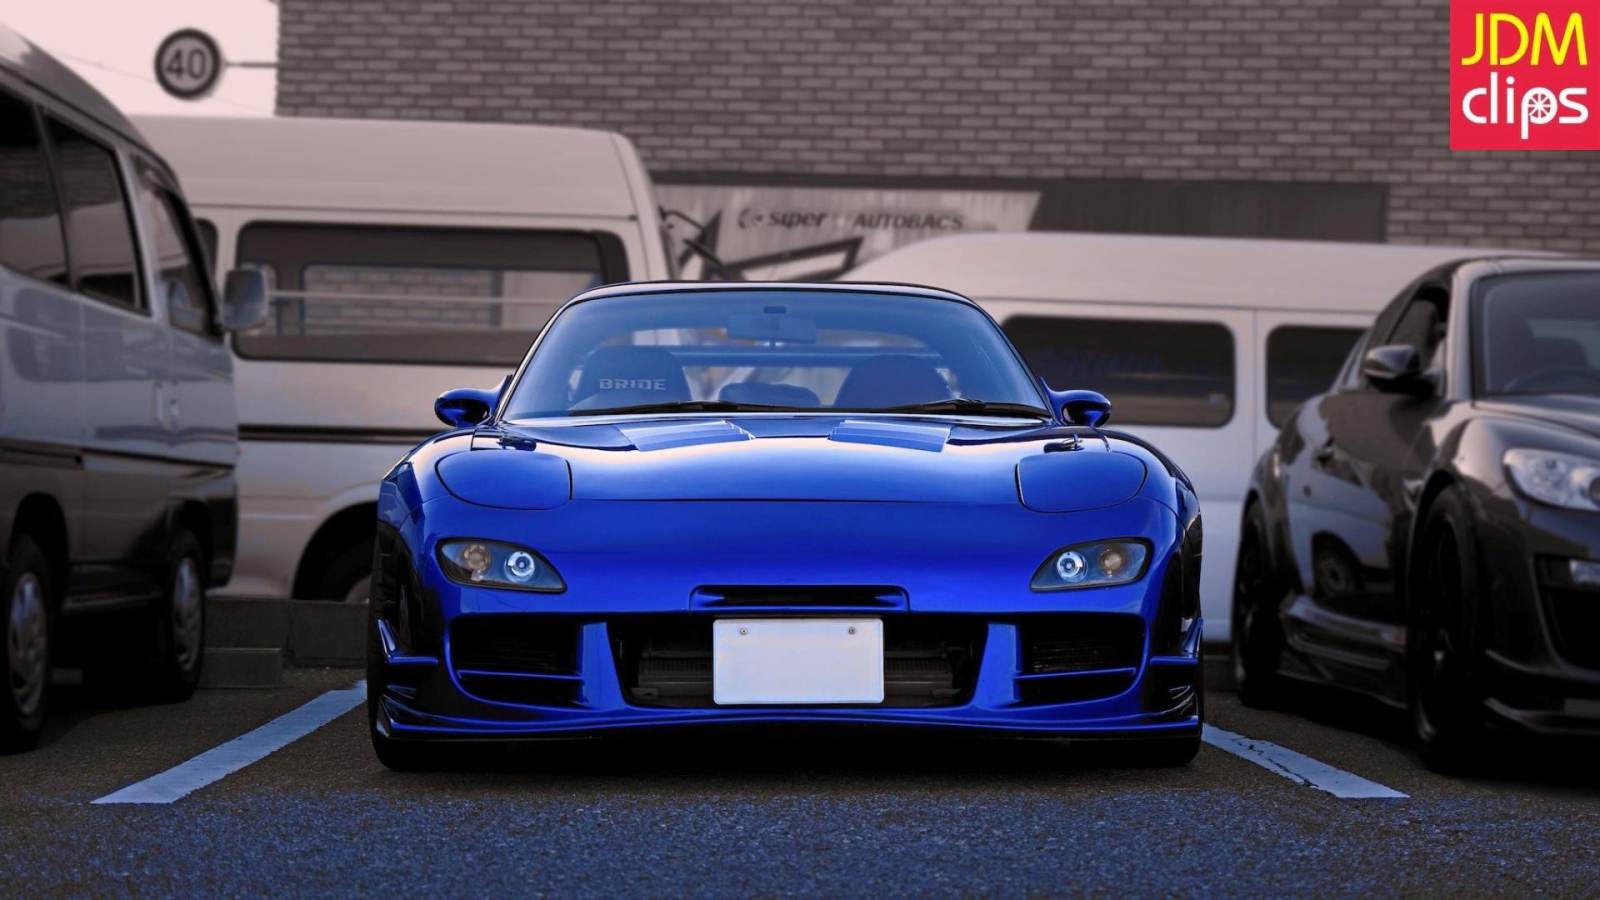 Blue Mazda RX-7 in the parking lot